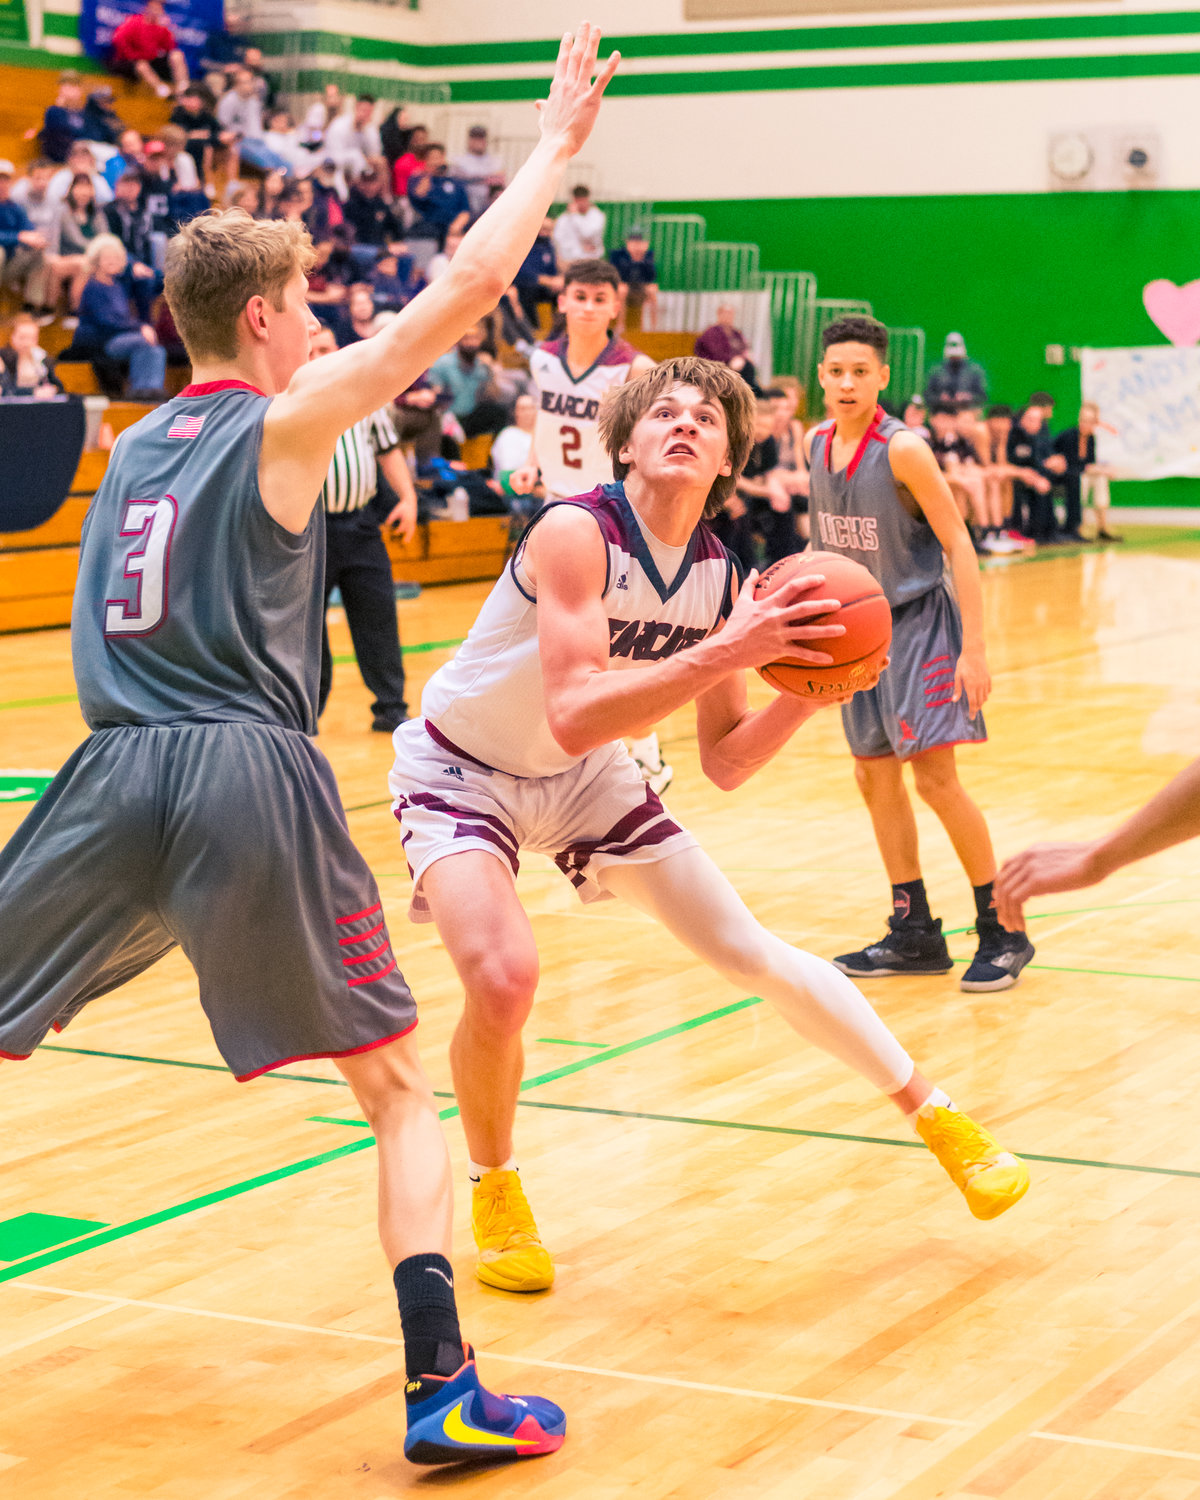 W.F. West's Carter McCoy (3) looks to shoot during a game against Jacks Thursday night at Tumwater High School.